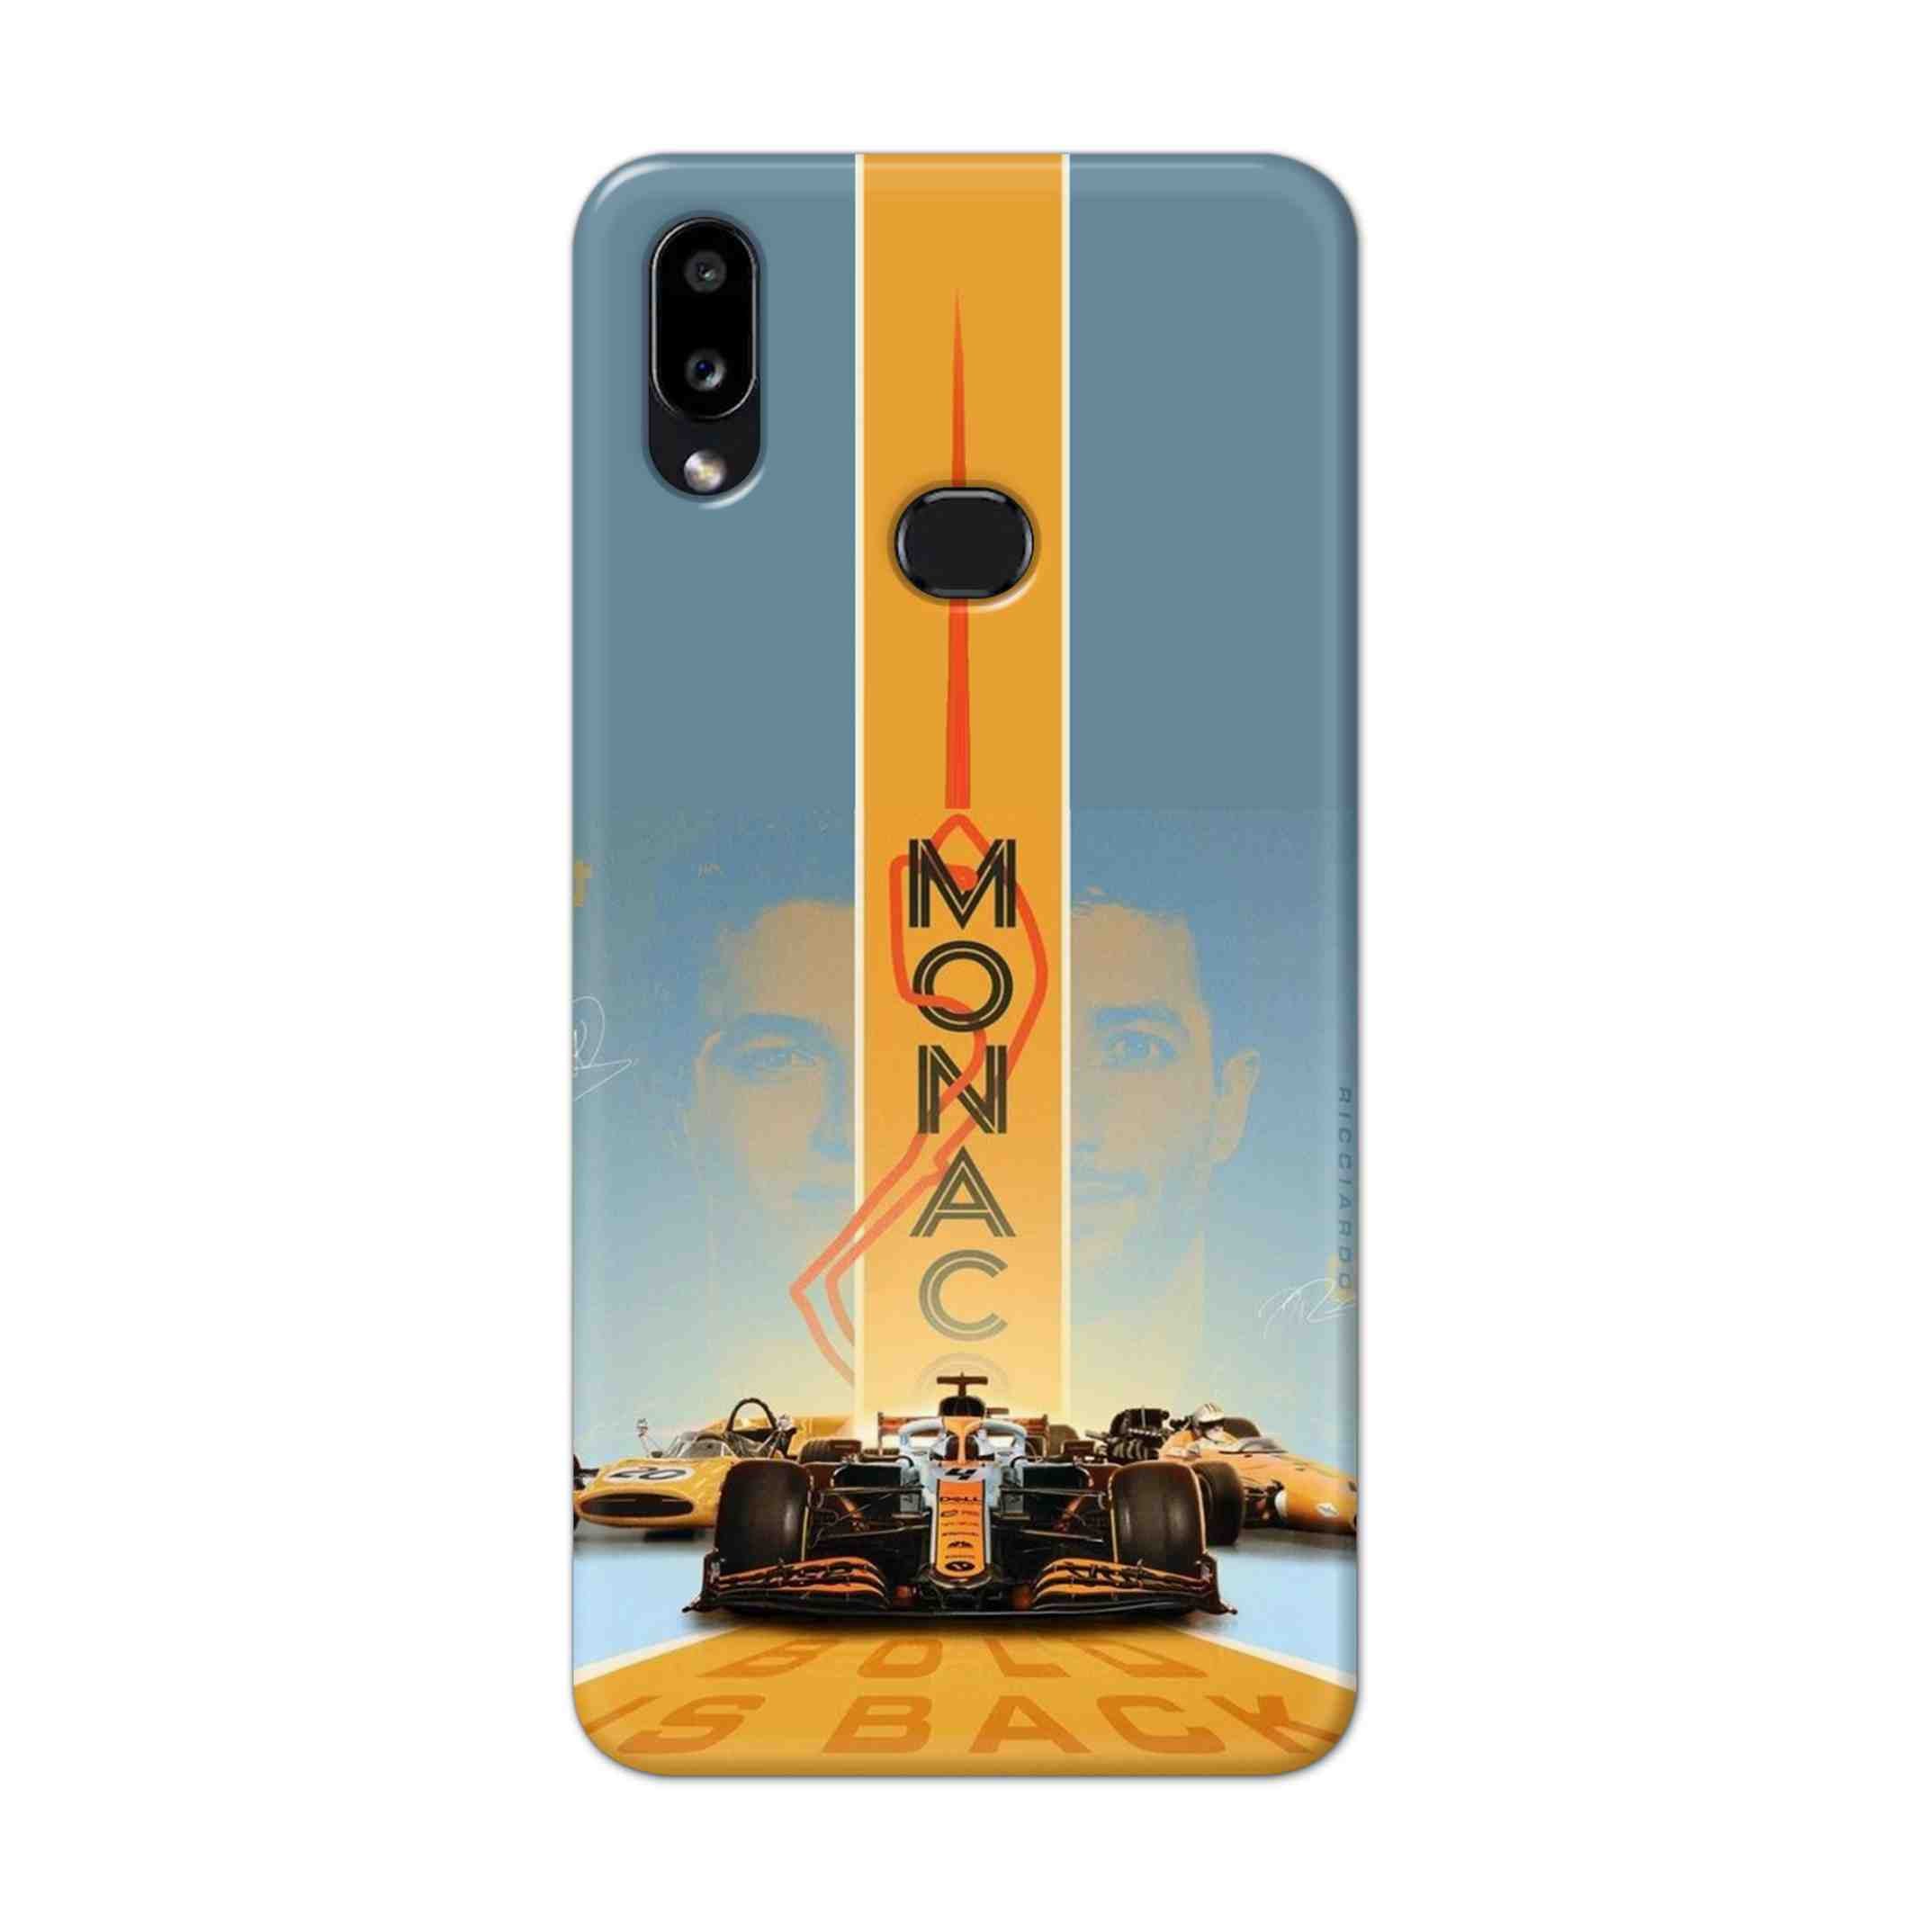 Buy Monac Formula Hard Back Mobile Phone Case Cover For Samsung Galaxy M01s Online